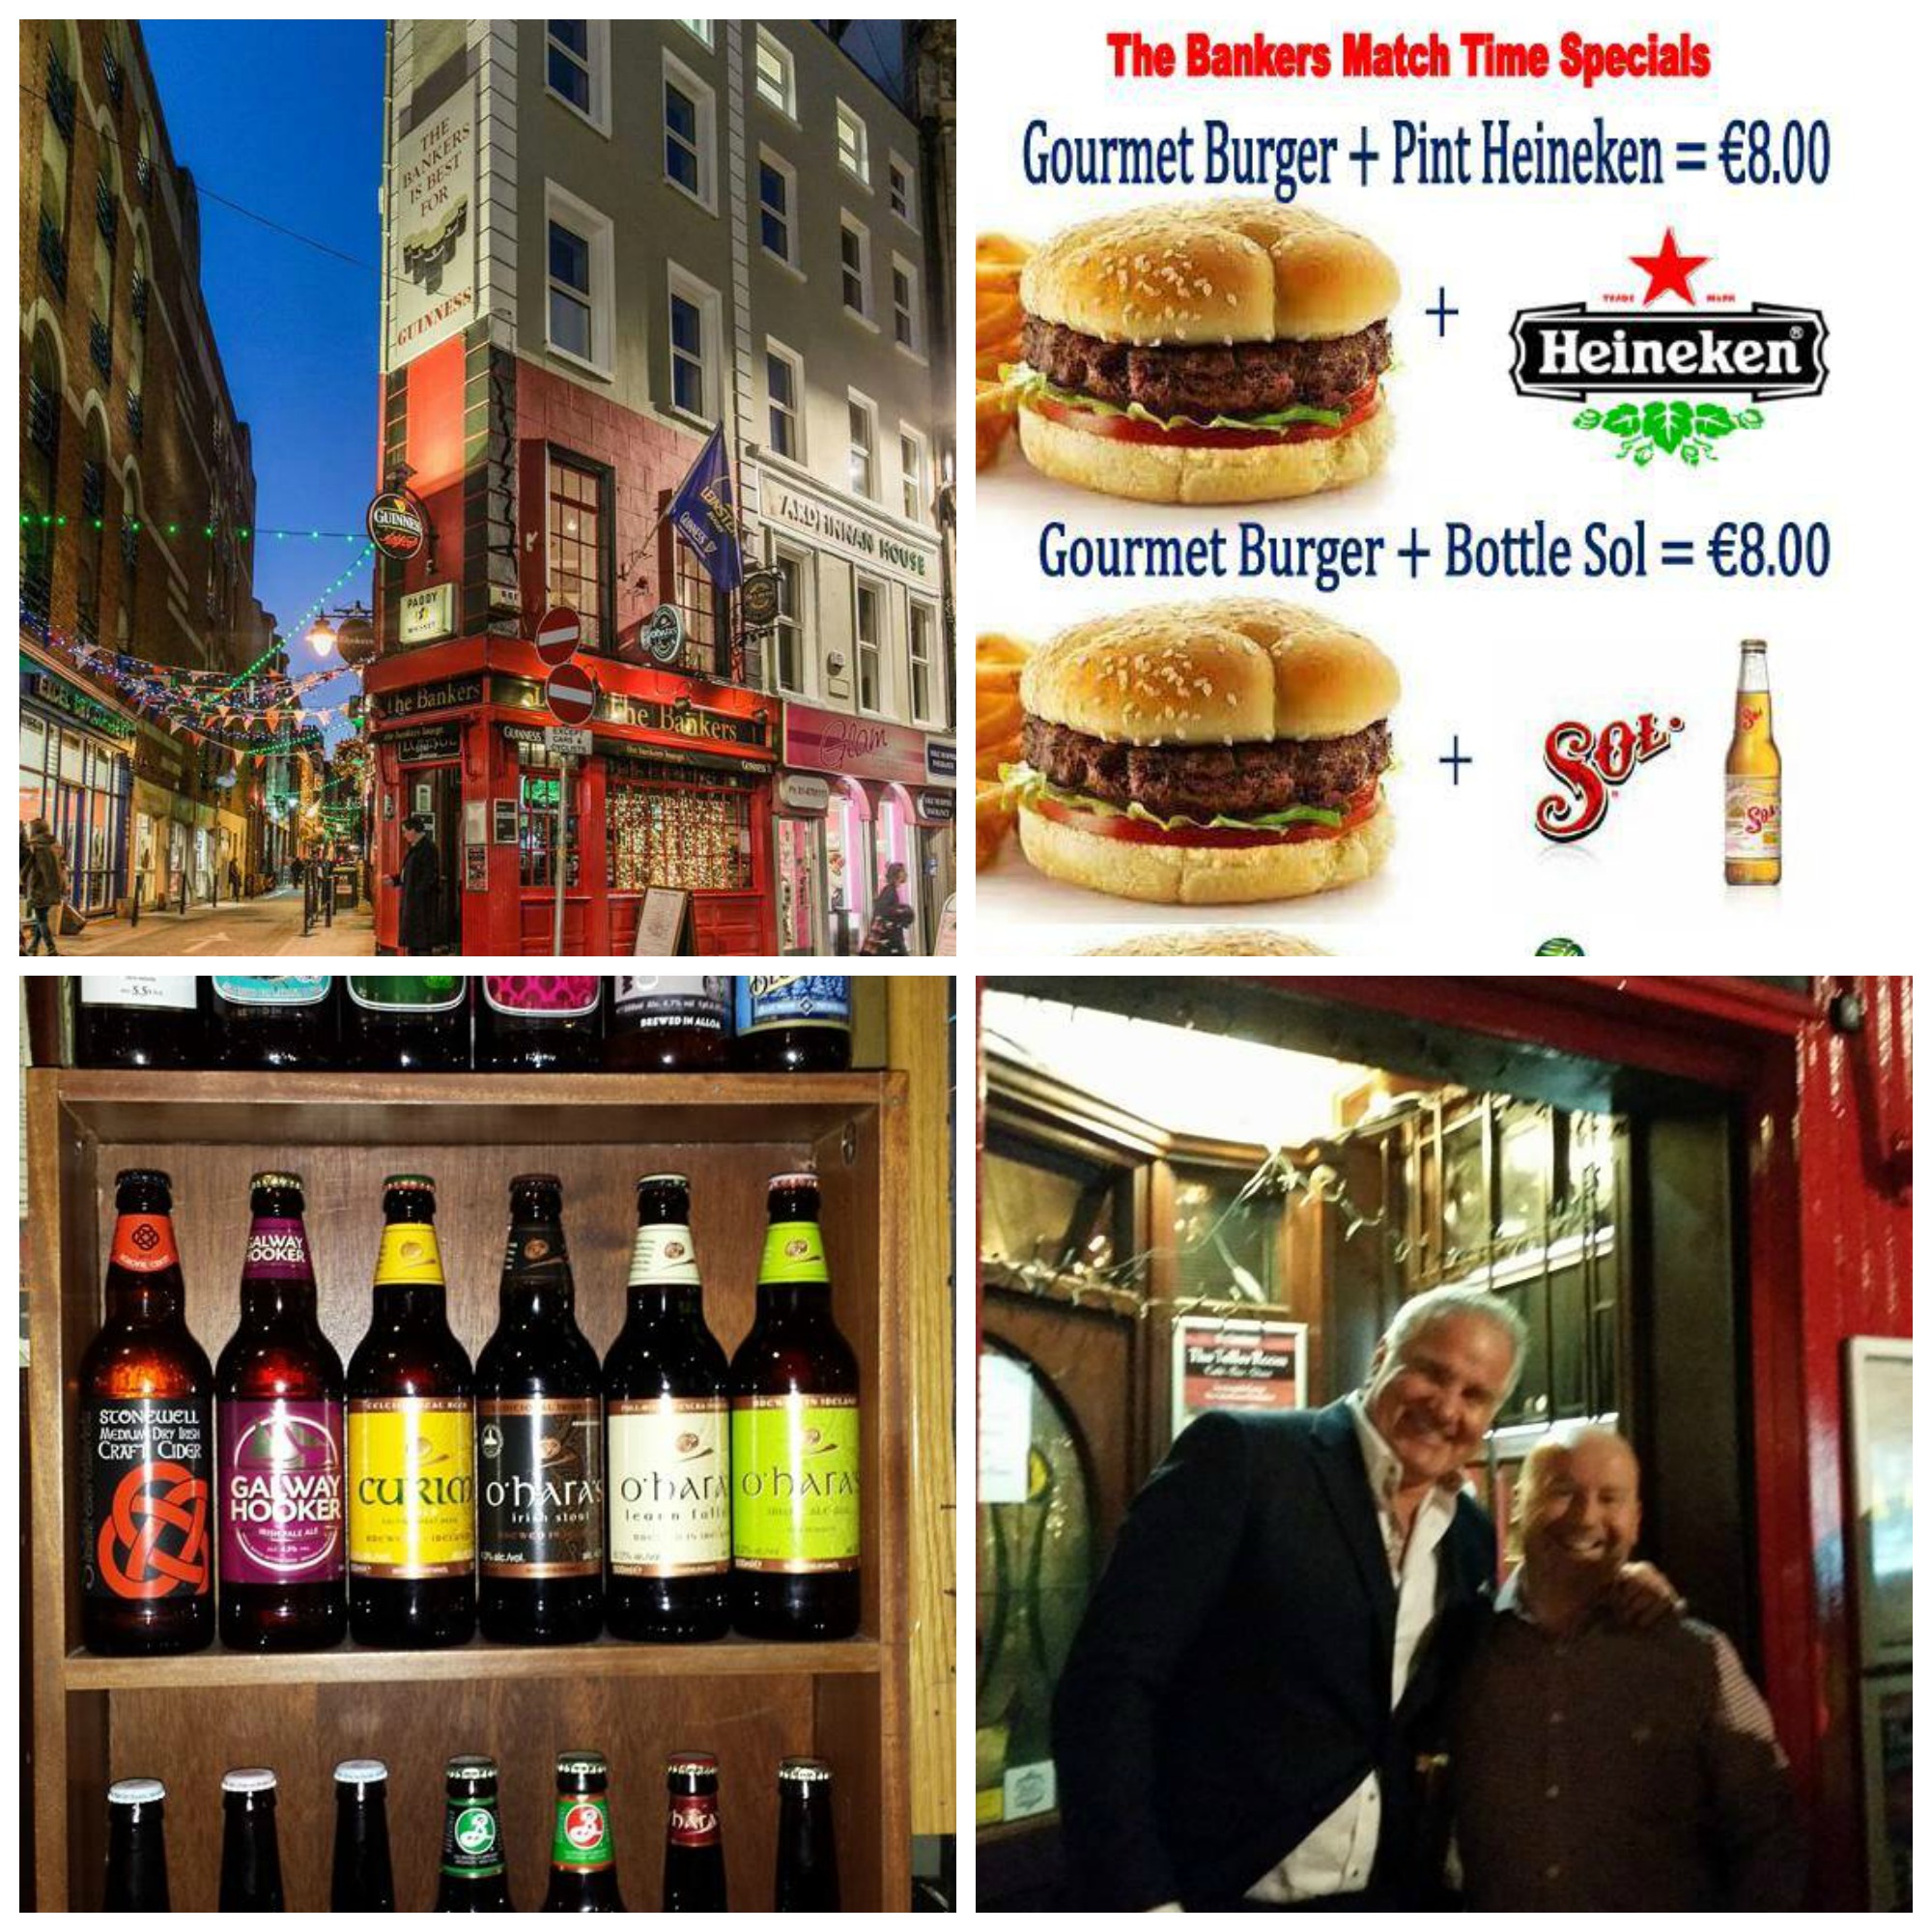 11 great pubs to watch the 6 Nations Publin